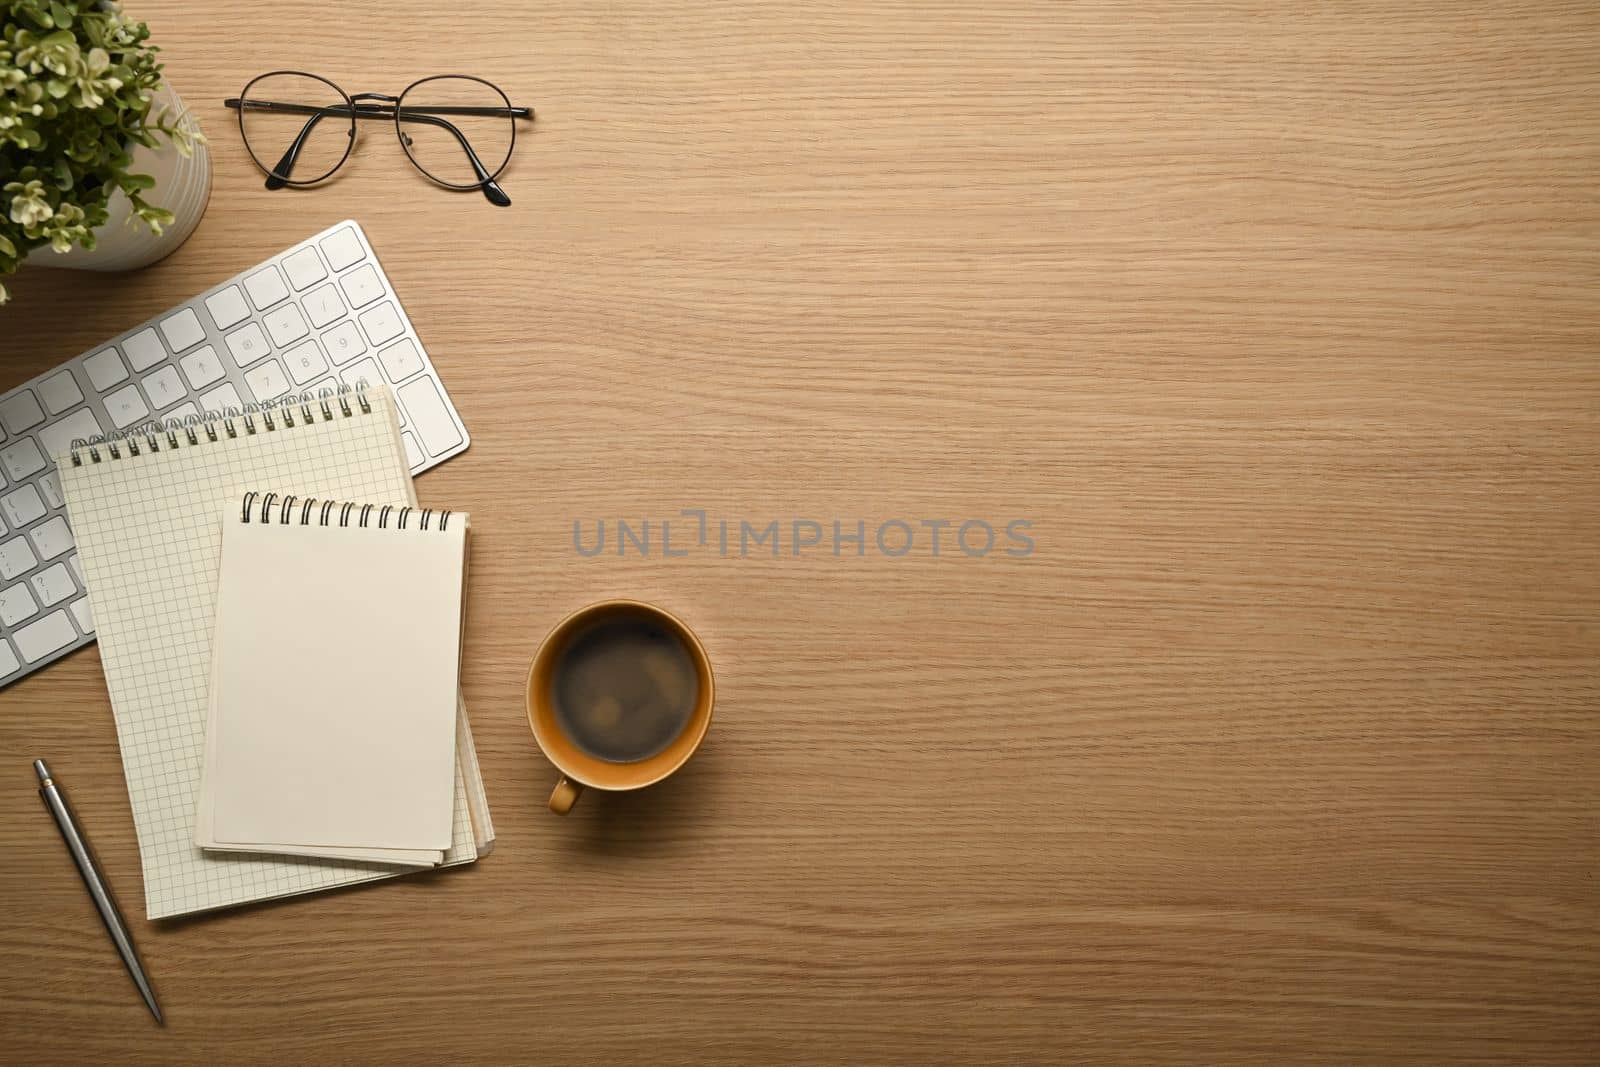 Simple workplace with notebooks, eyeglasses, keyboard and coffee cup on wooden desk.